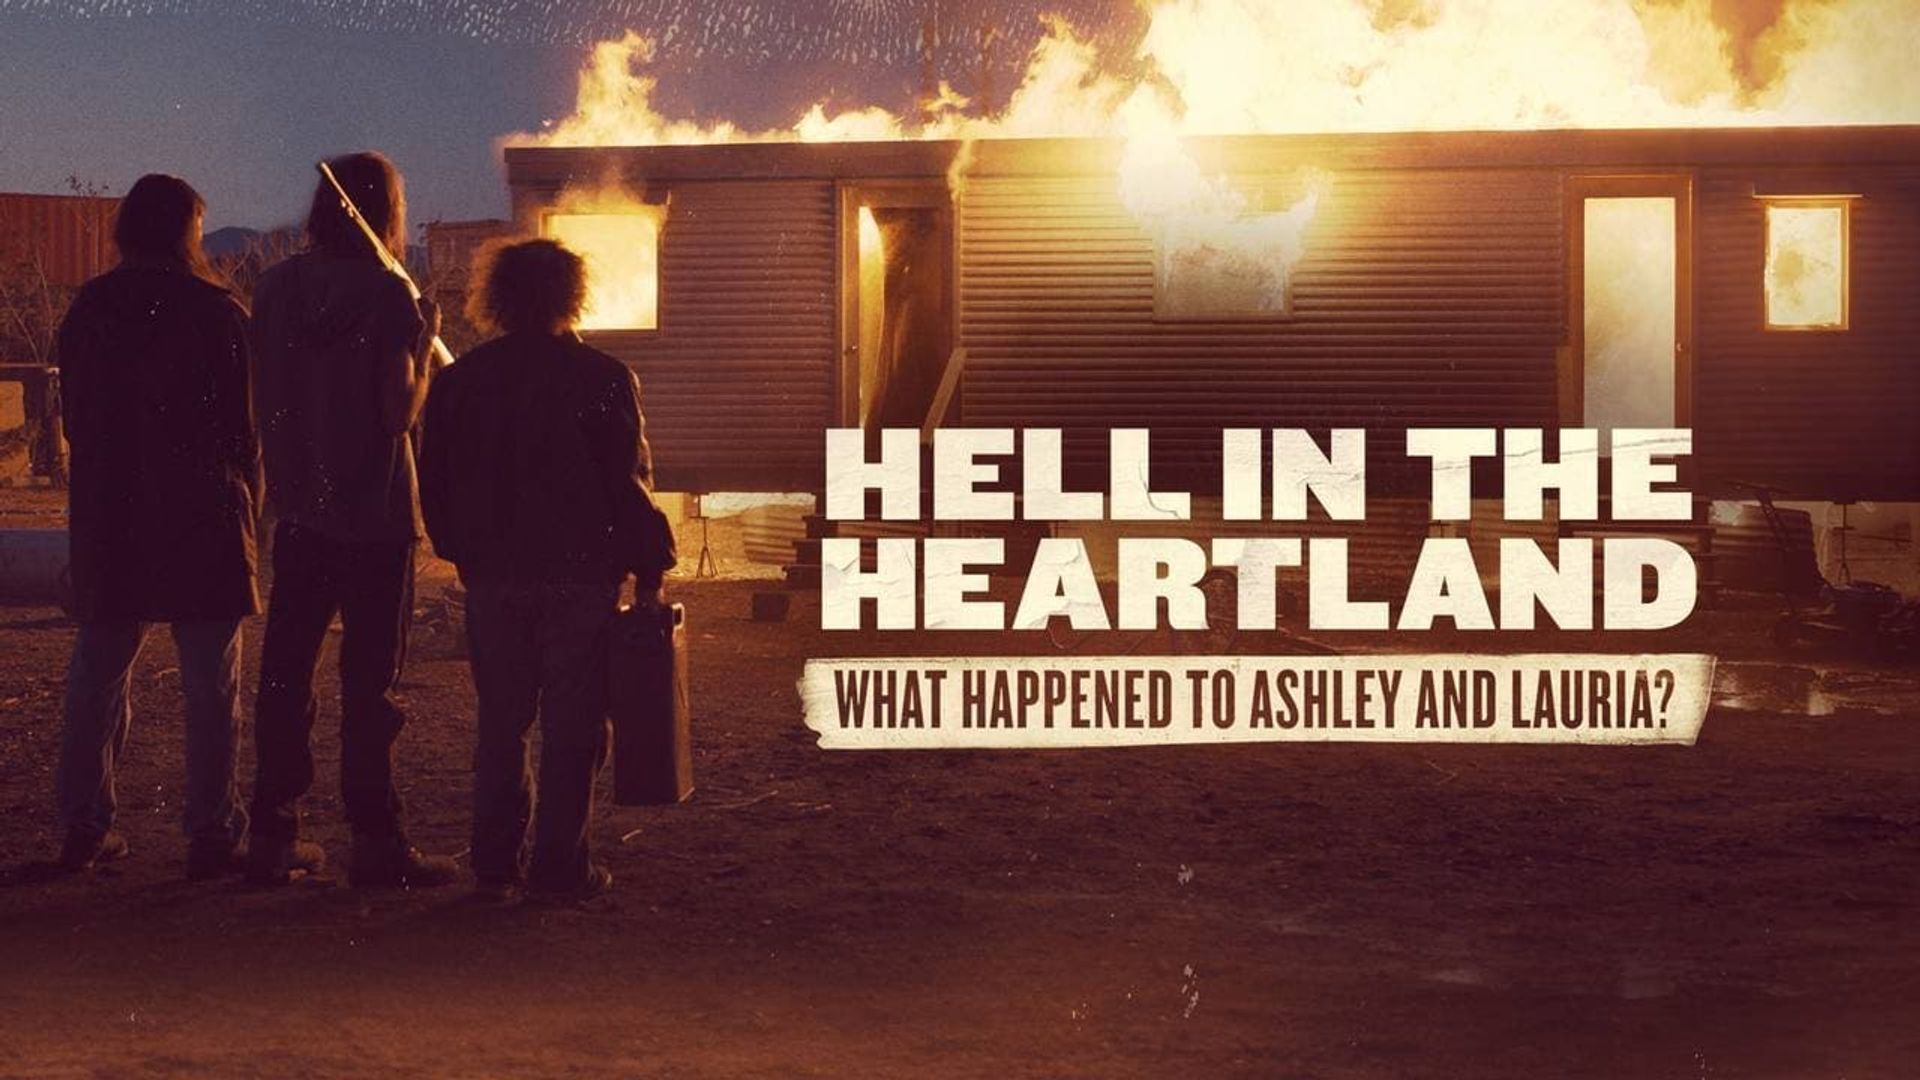 Hell in the Heartland: What Happened to Ashley and Lauria background